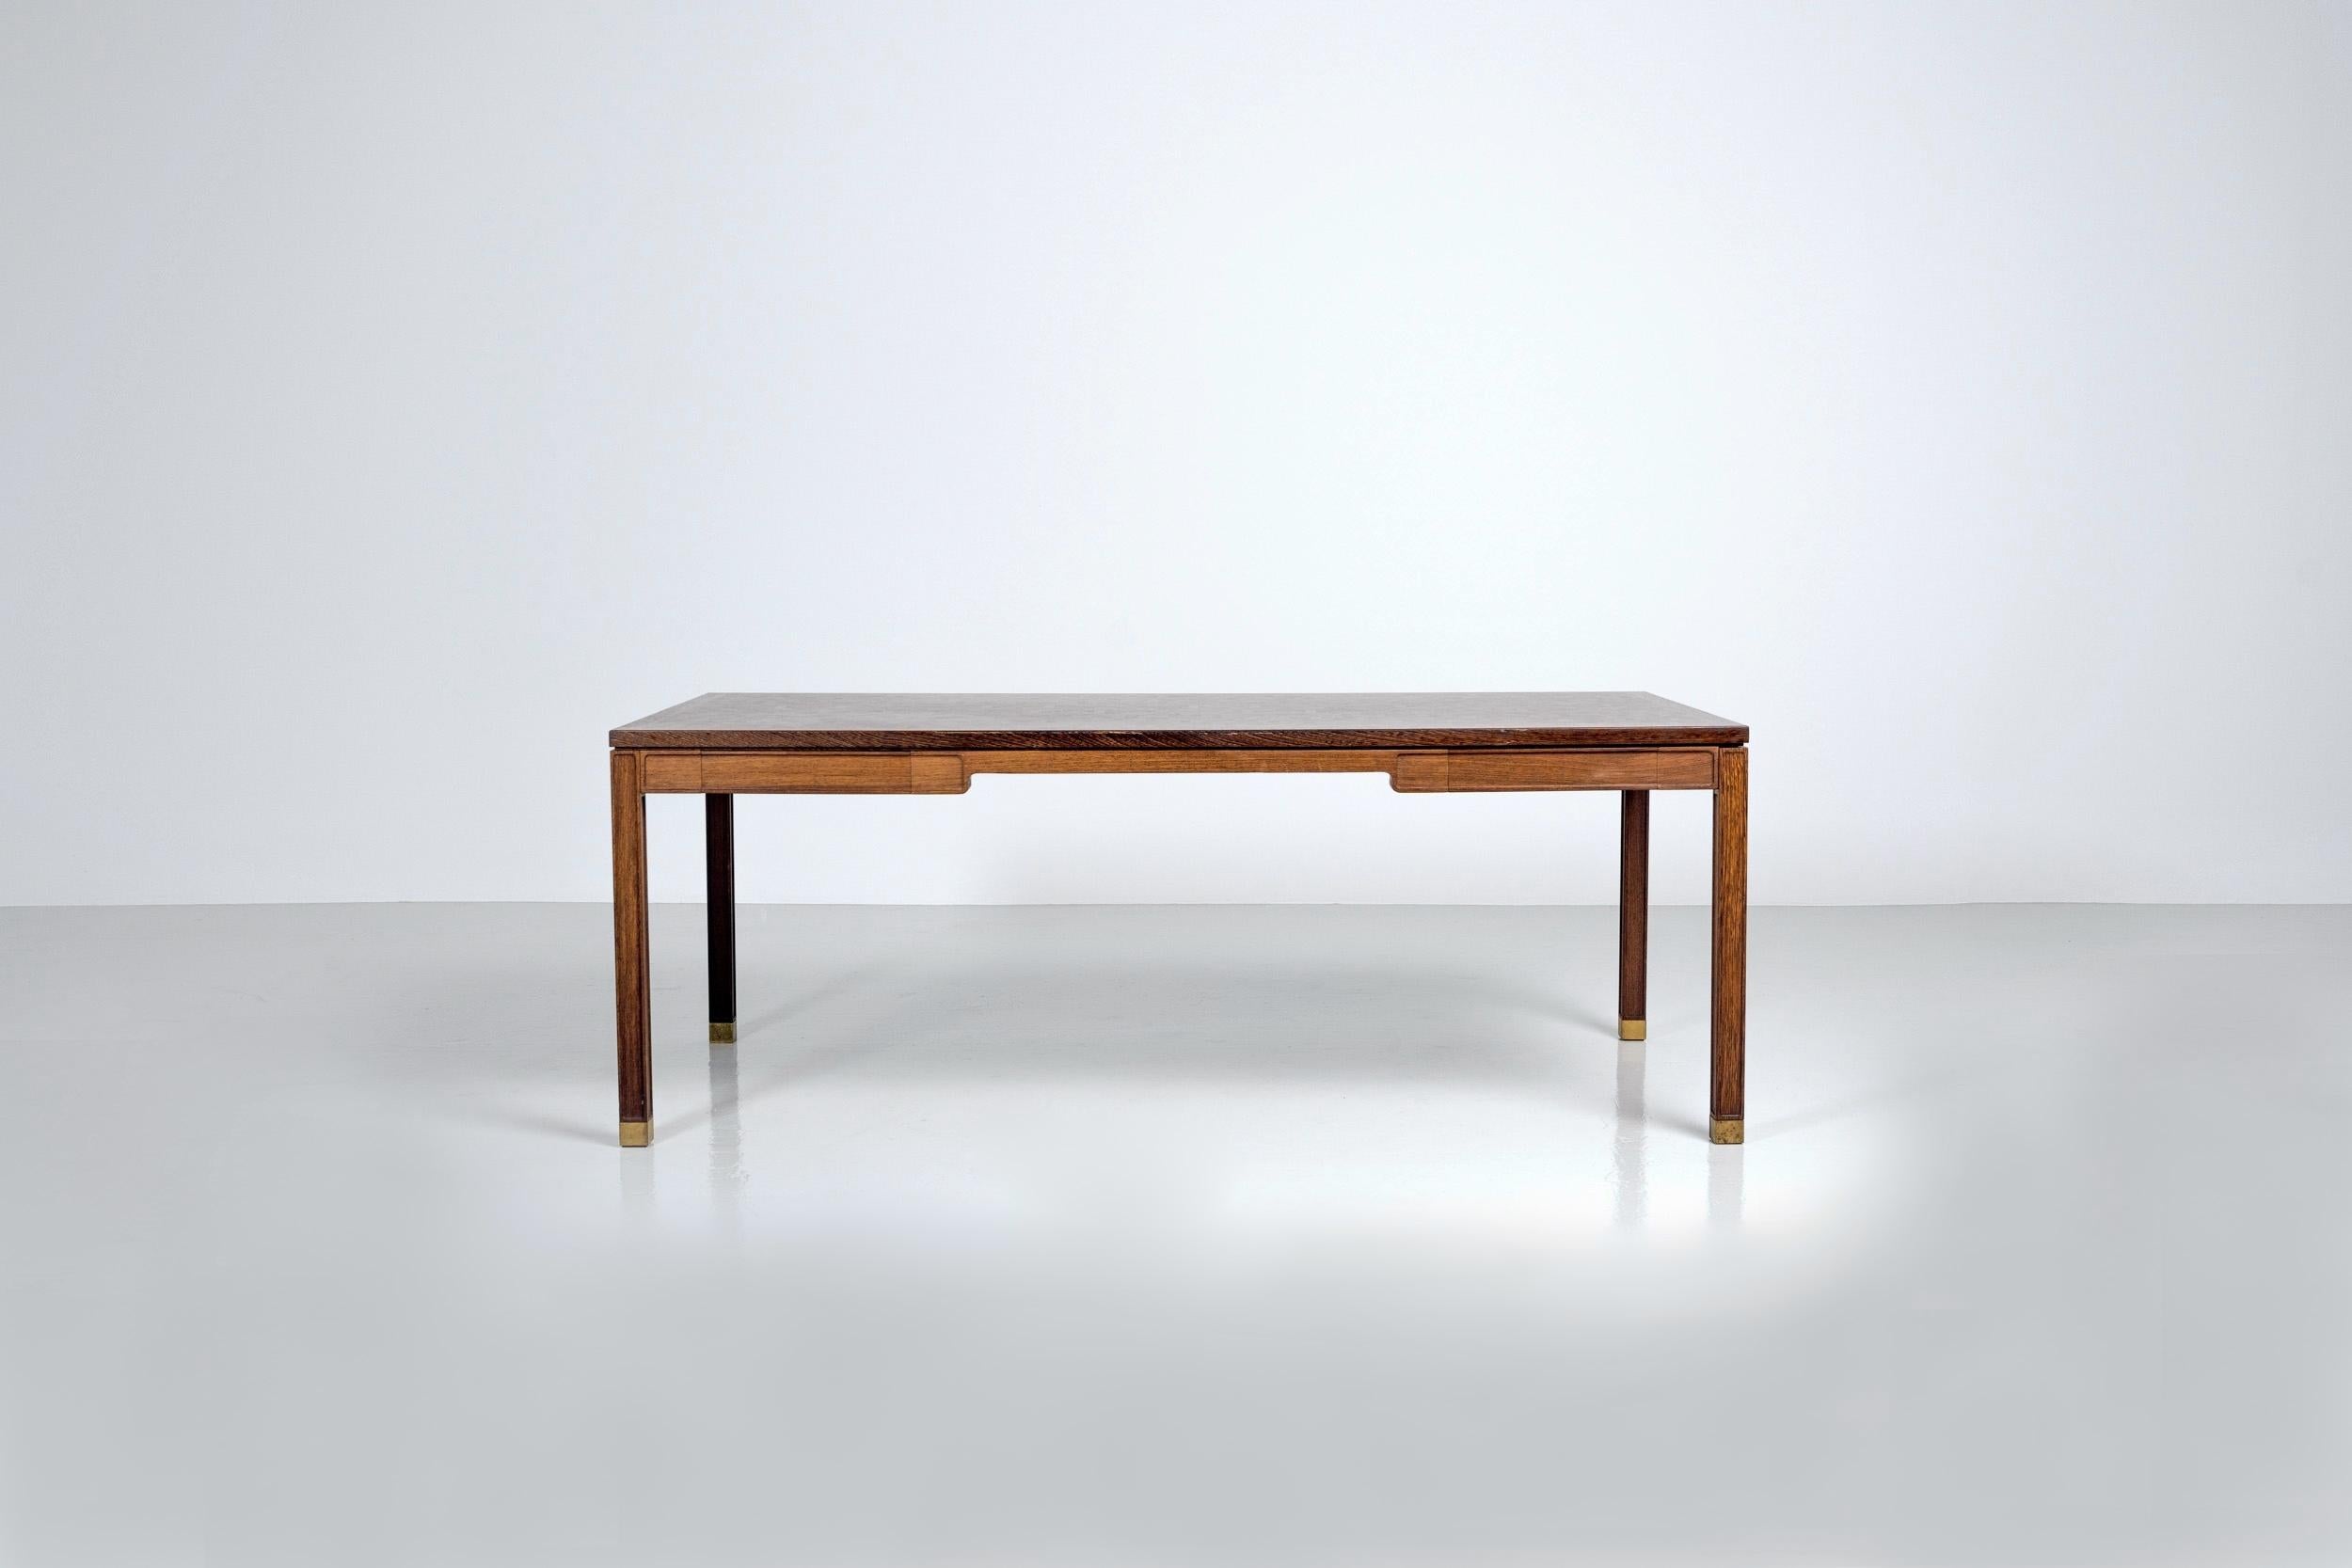 Stunning large writing desk designed by Gorm Lindrum and Rolf Middelboe and manufactured by Tranekær Furniture, Denmark 1970. The desk is made or partly solid wenge wood and partly veneer. The top is composed of several small tiles of veneer and